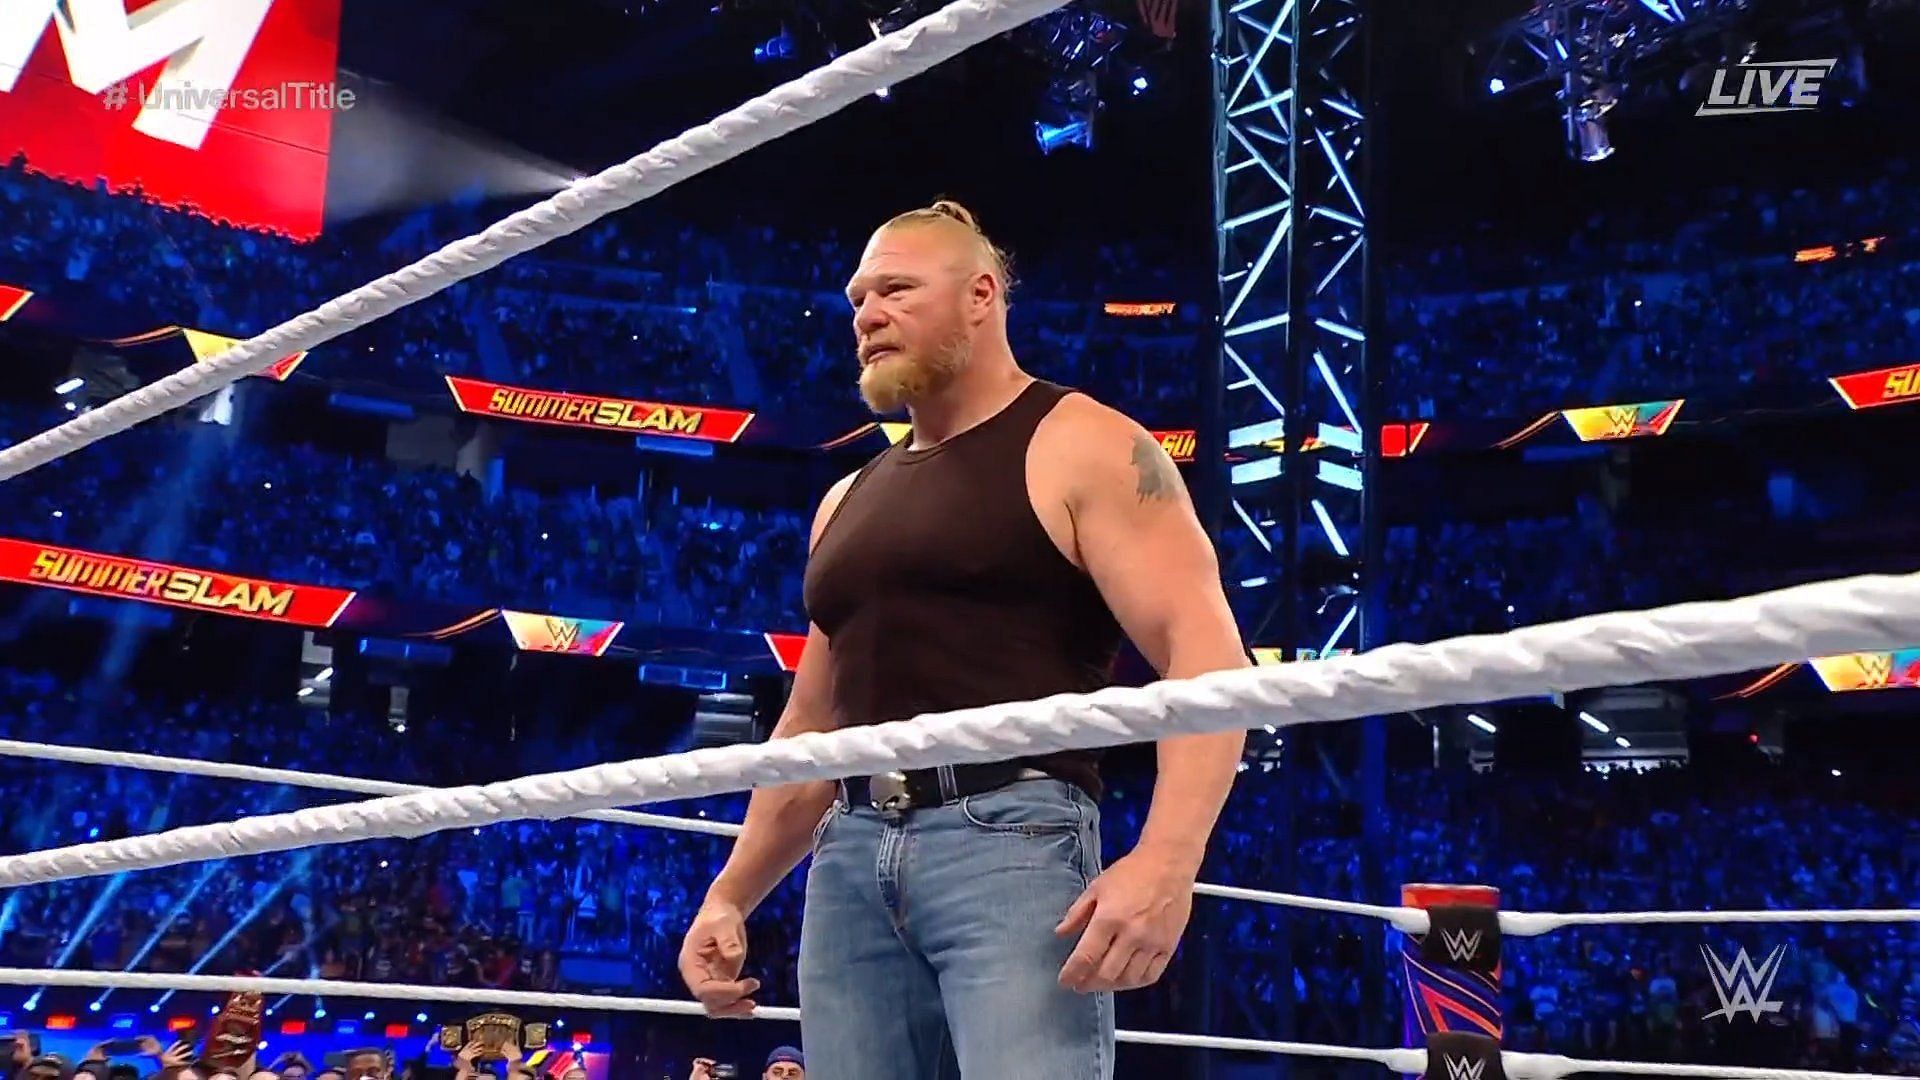 Brock Lesnar standing in the ring after returning at SummerSlam 2021